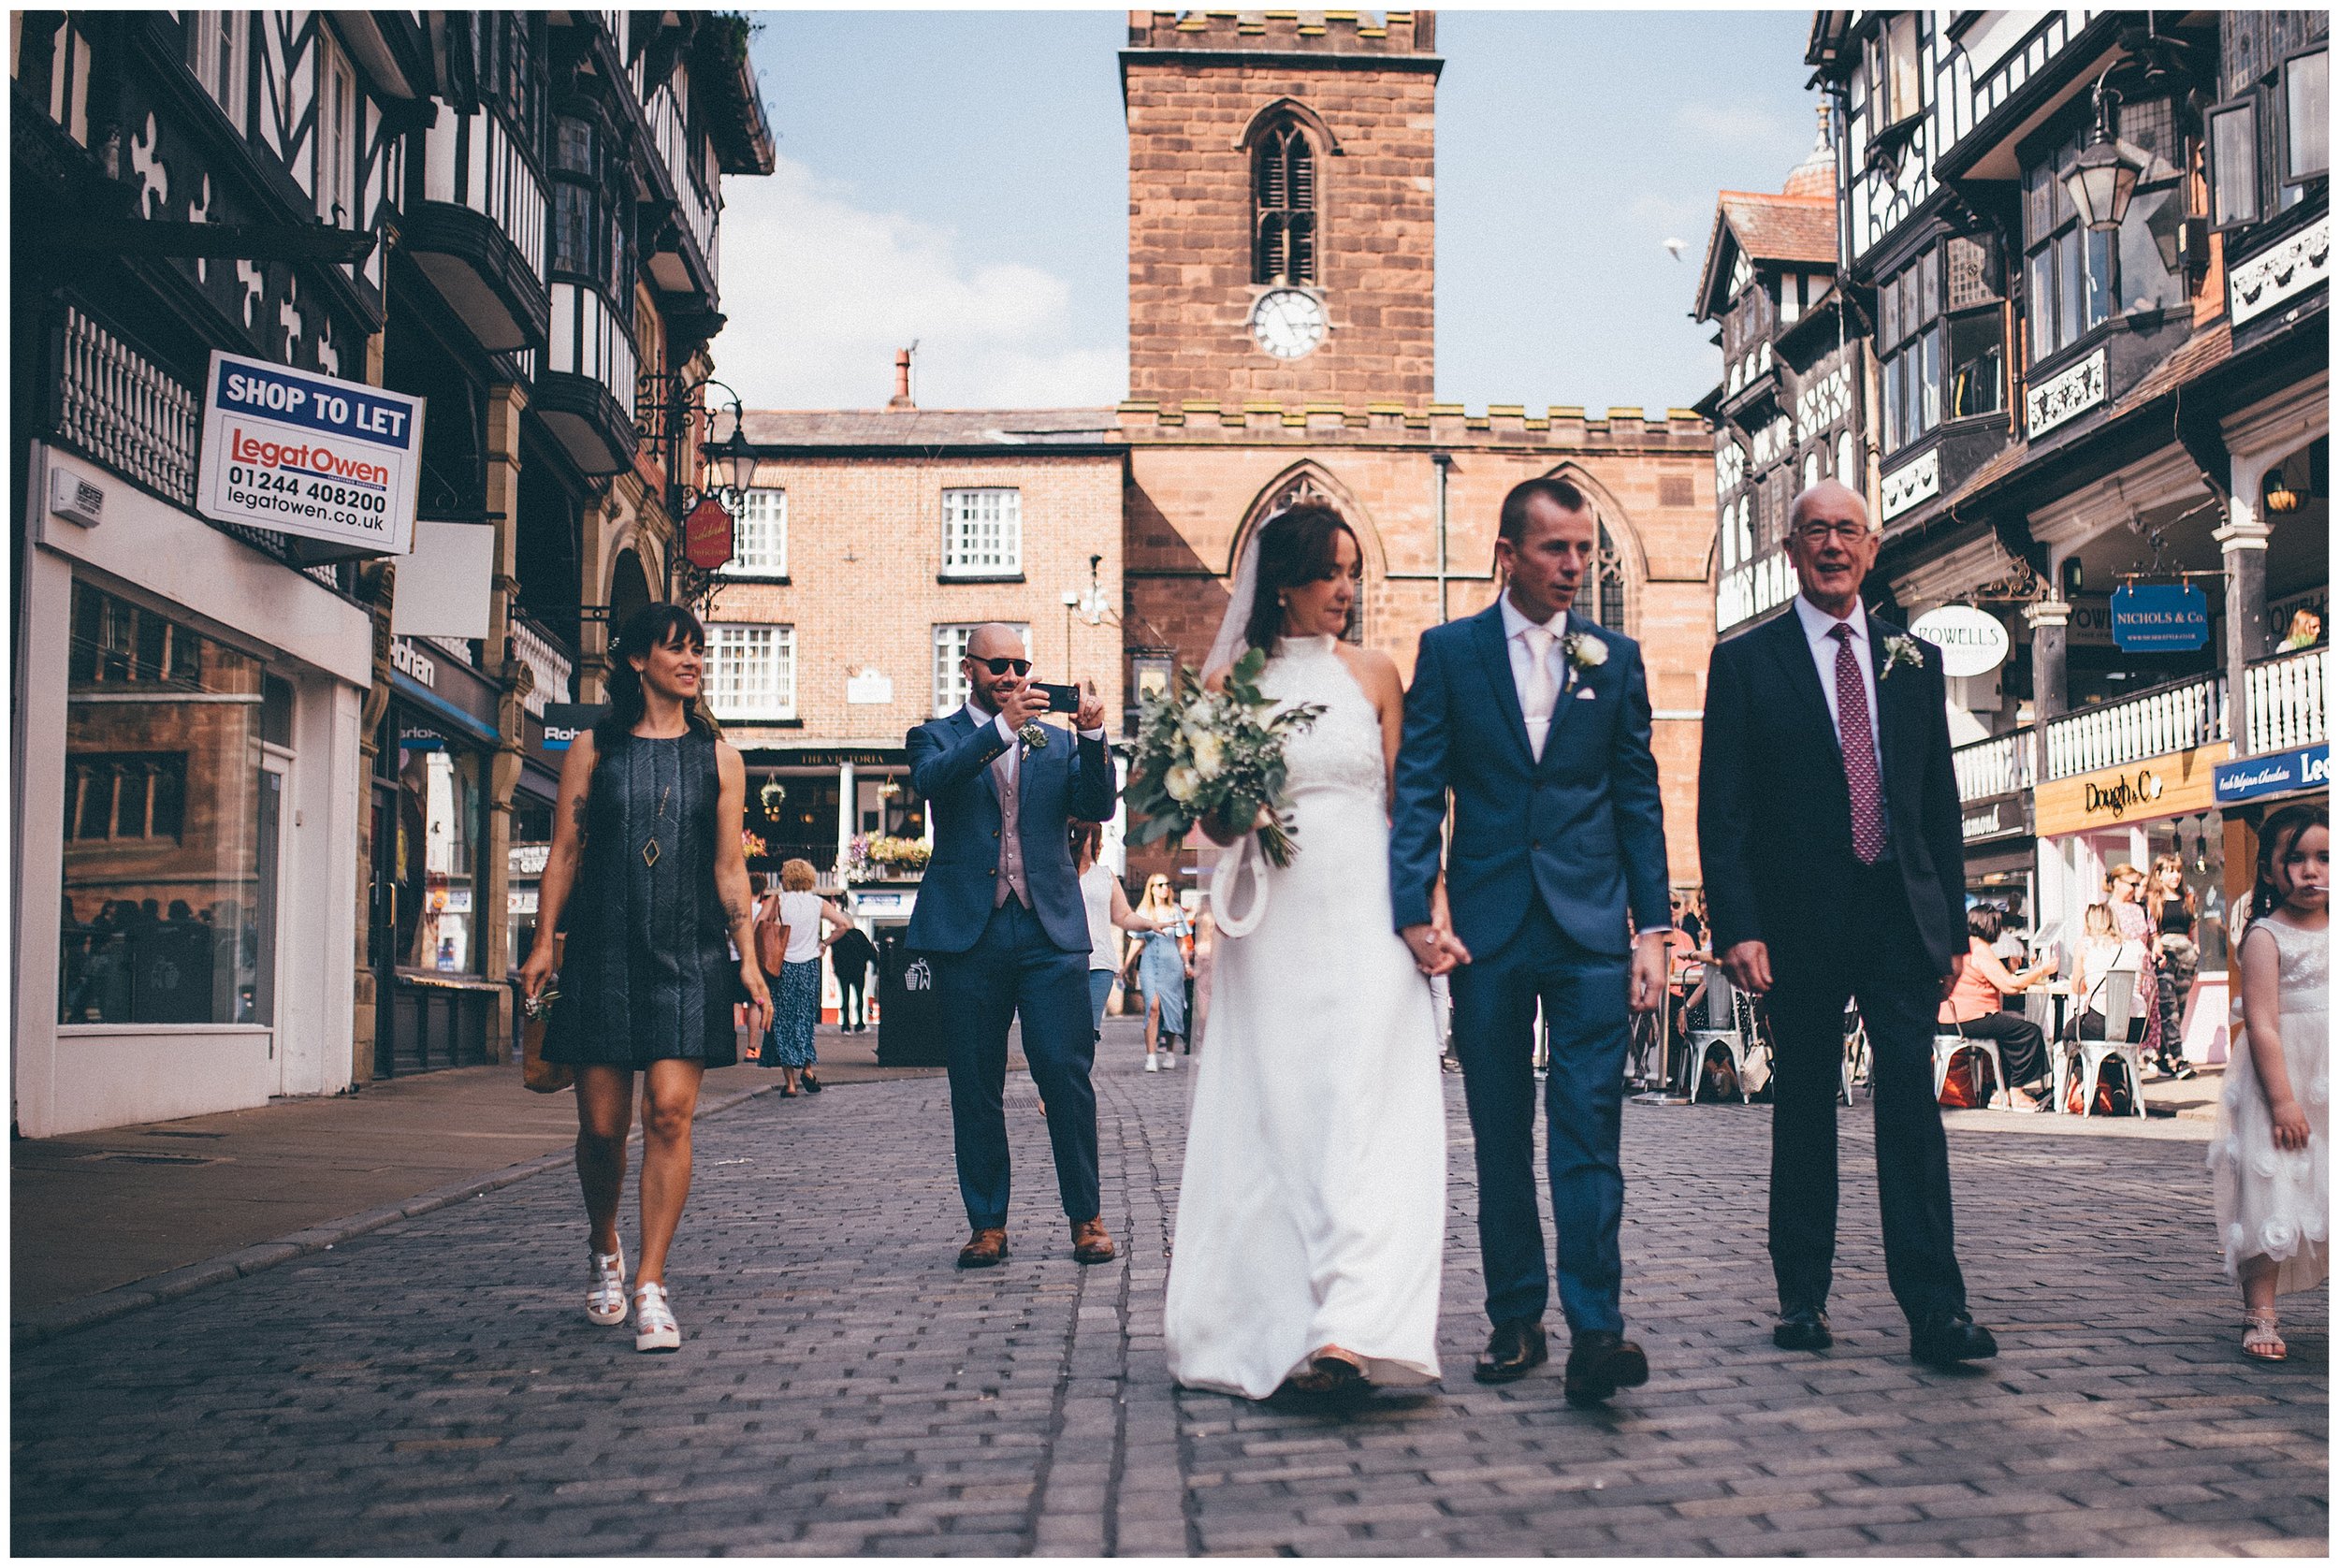 Guest takes a photograph of bride and groom walking through Chester city centre